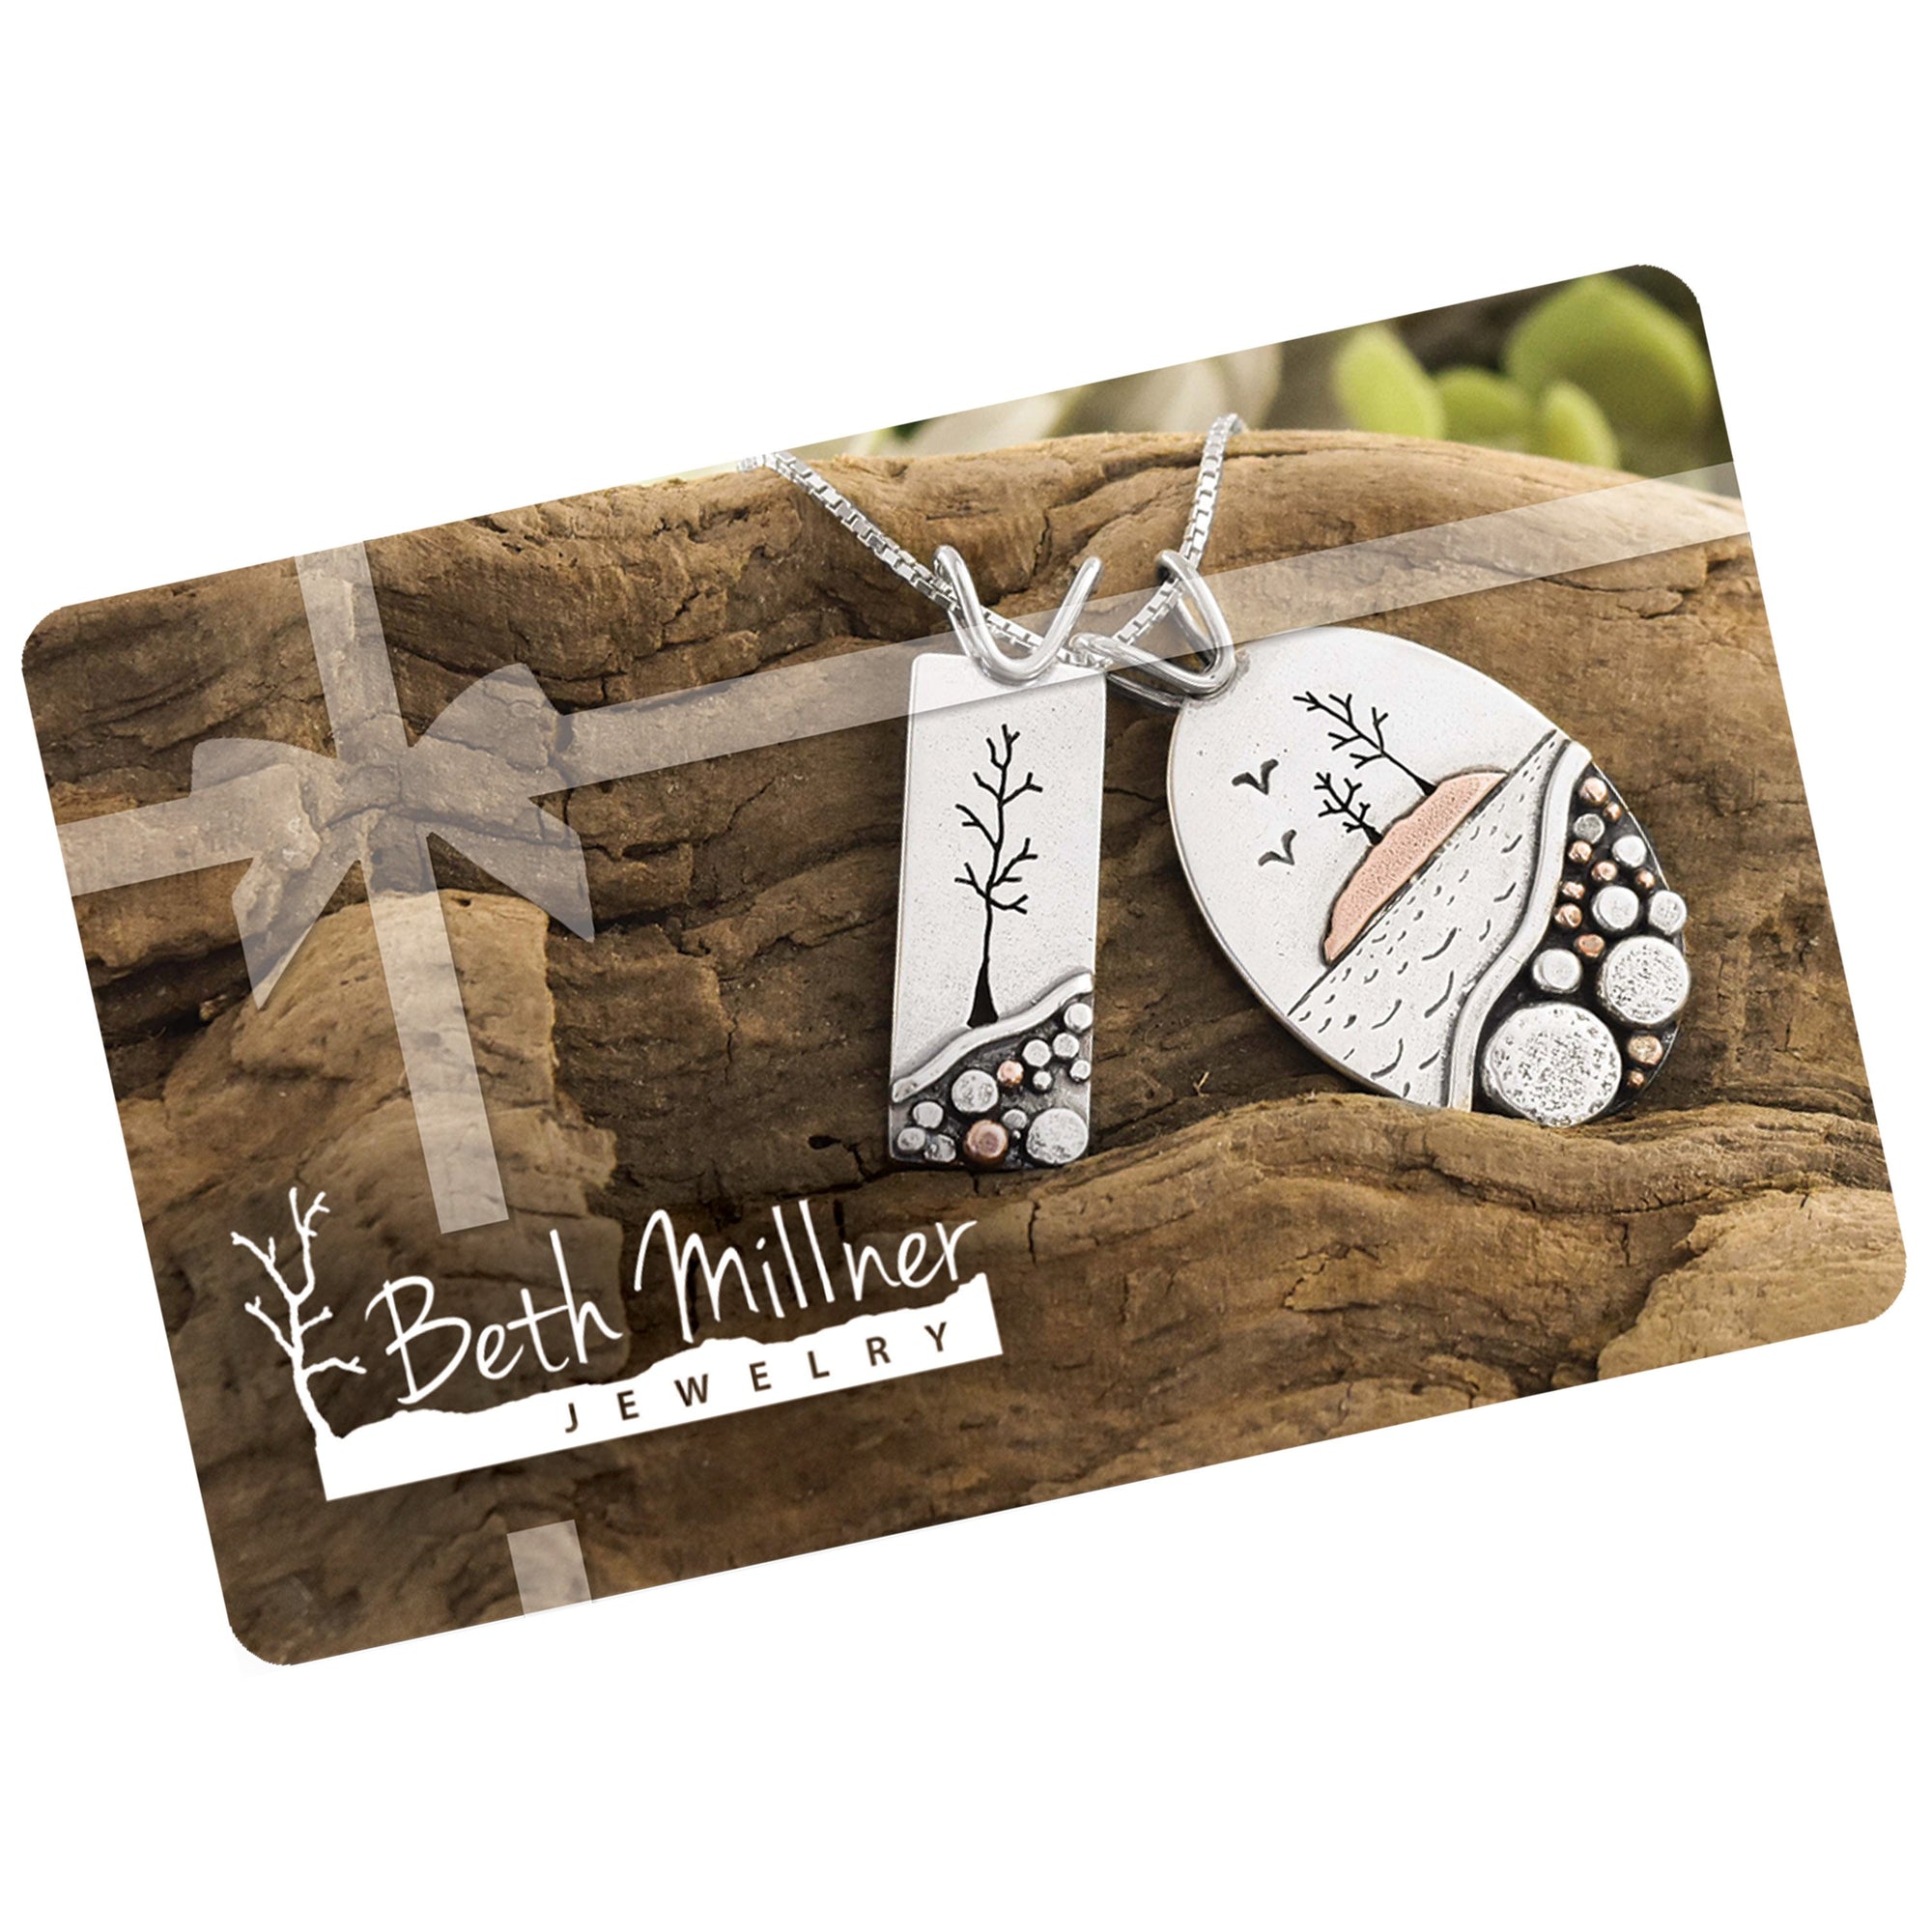 Gift Card - Gift Cards  $10  $20 GIFTCARD - handmade by Beth Millner Jewelry